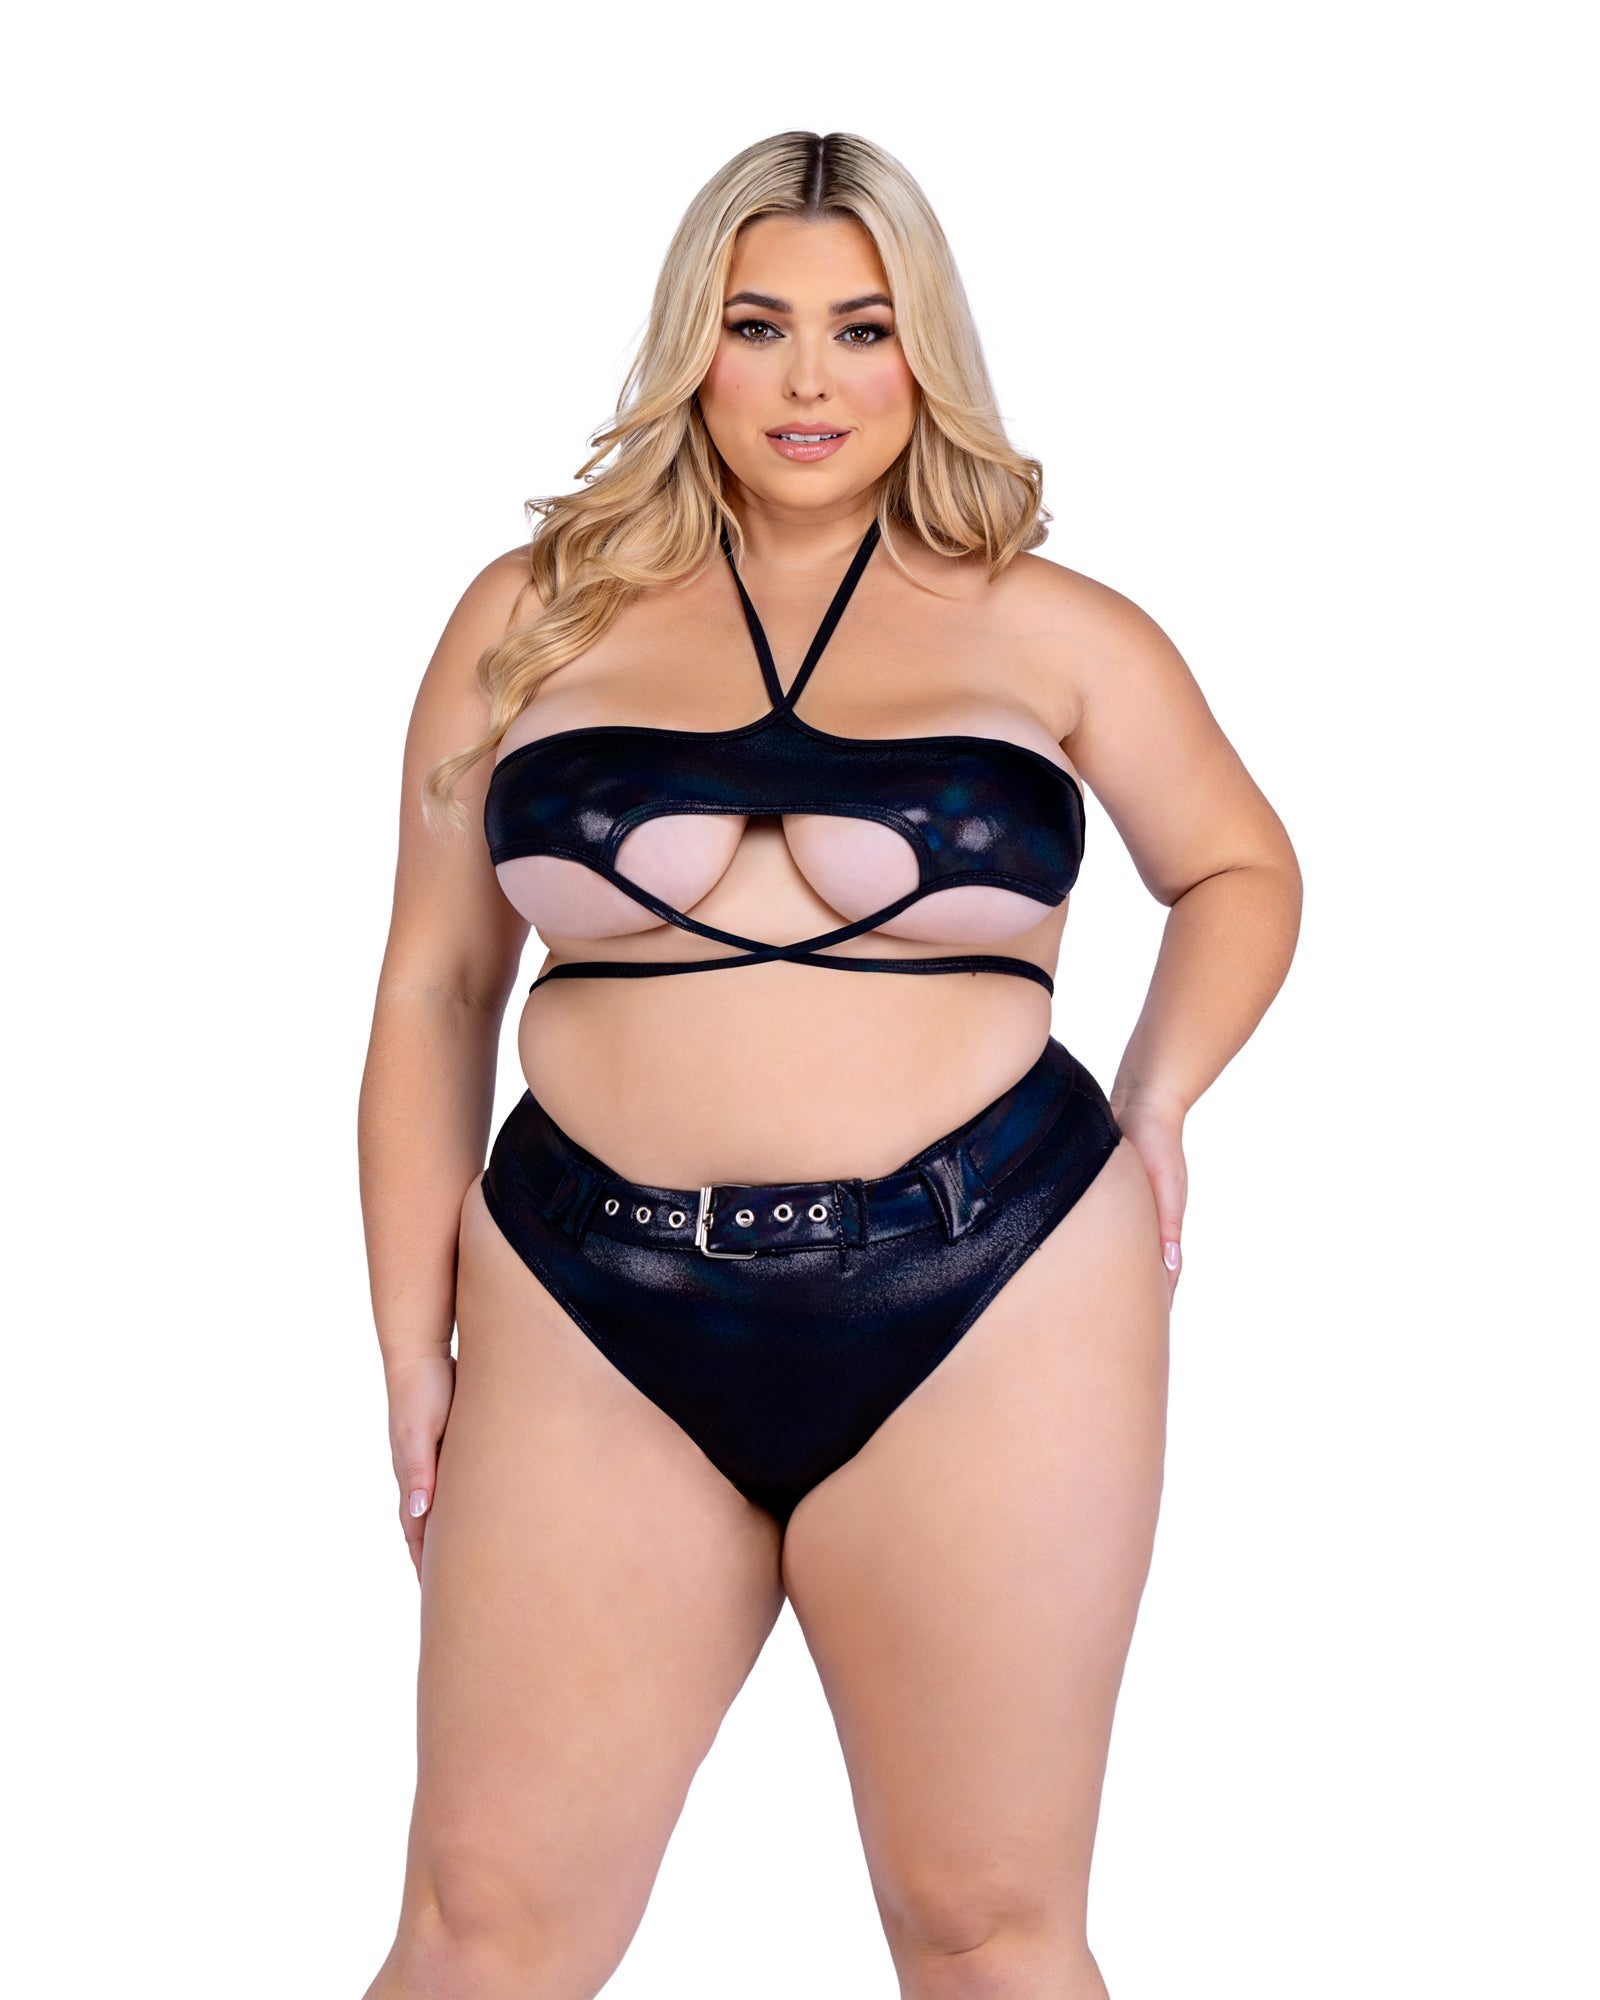 Roma Costume 6439 Shimmer Top with Underboob Cutout